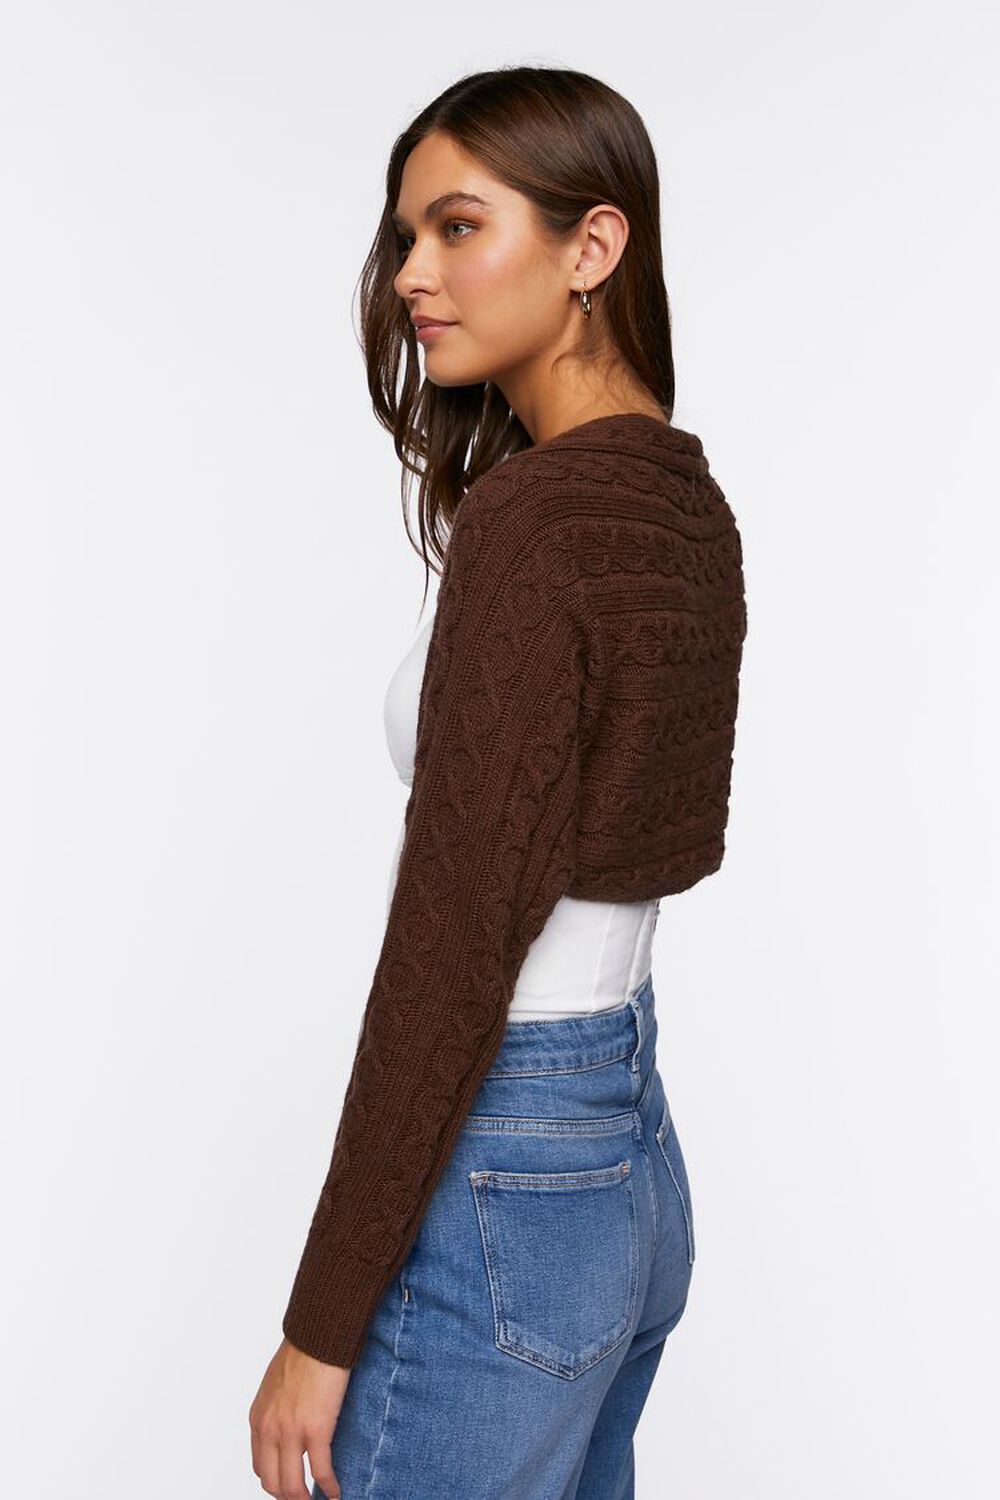 BROWN Cable Knit Shrug Sweater, image 2